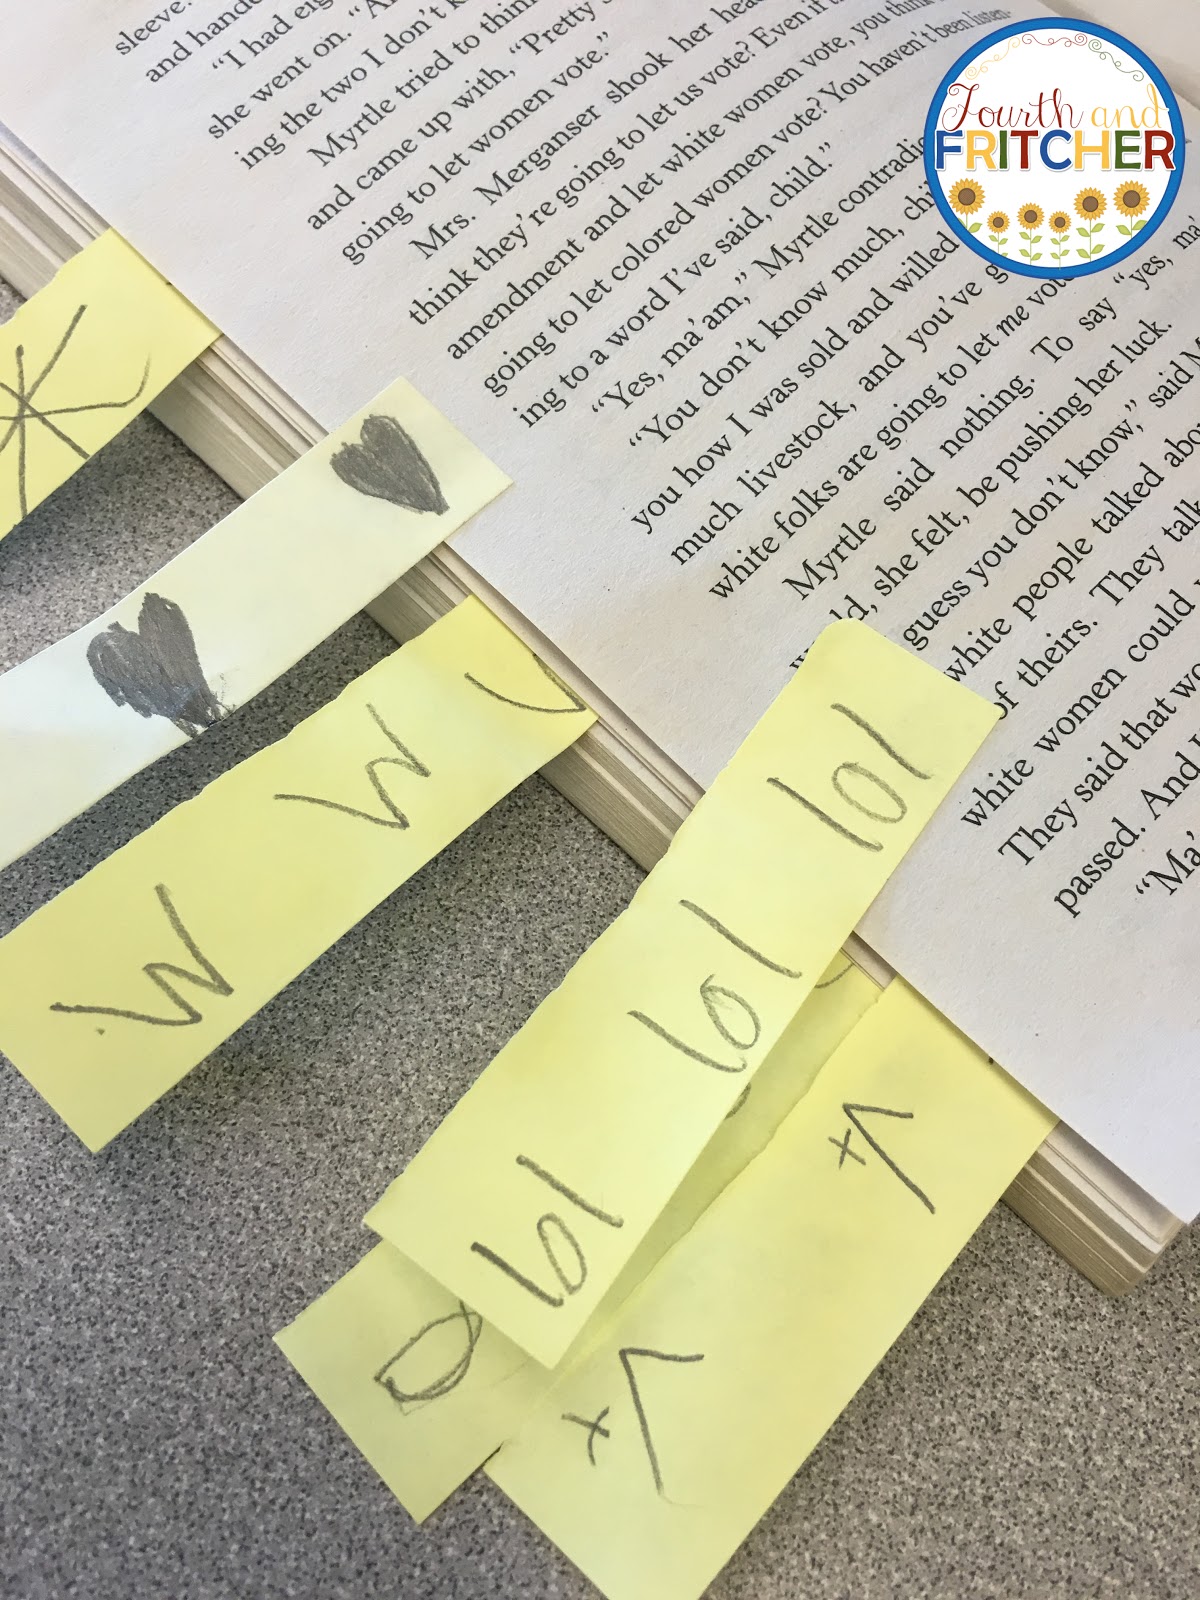 4 Good Ways To Use Sticky Notes - Marc's Blog